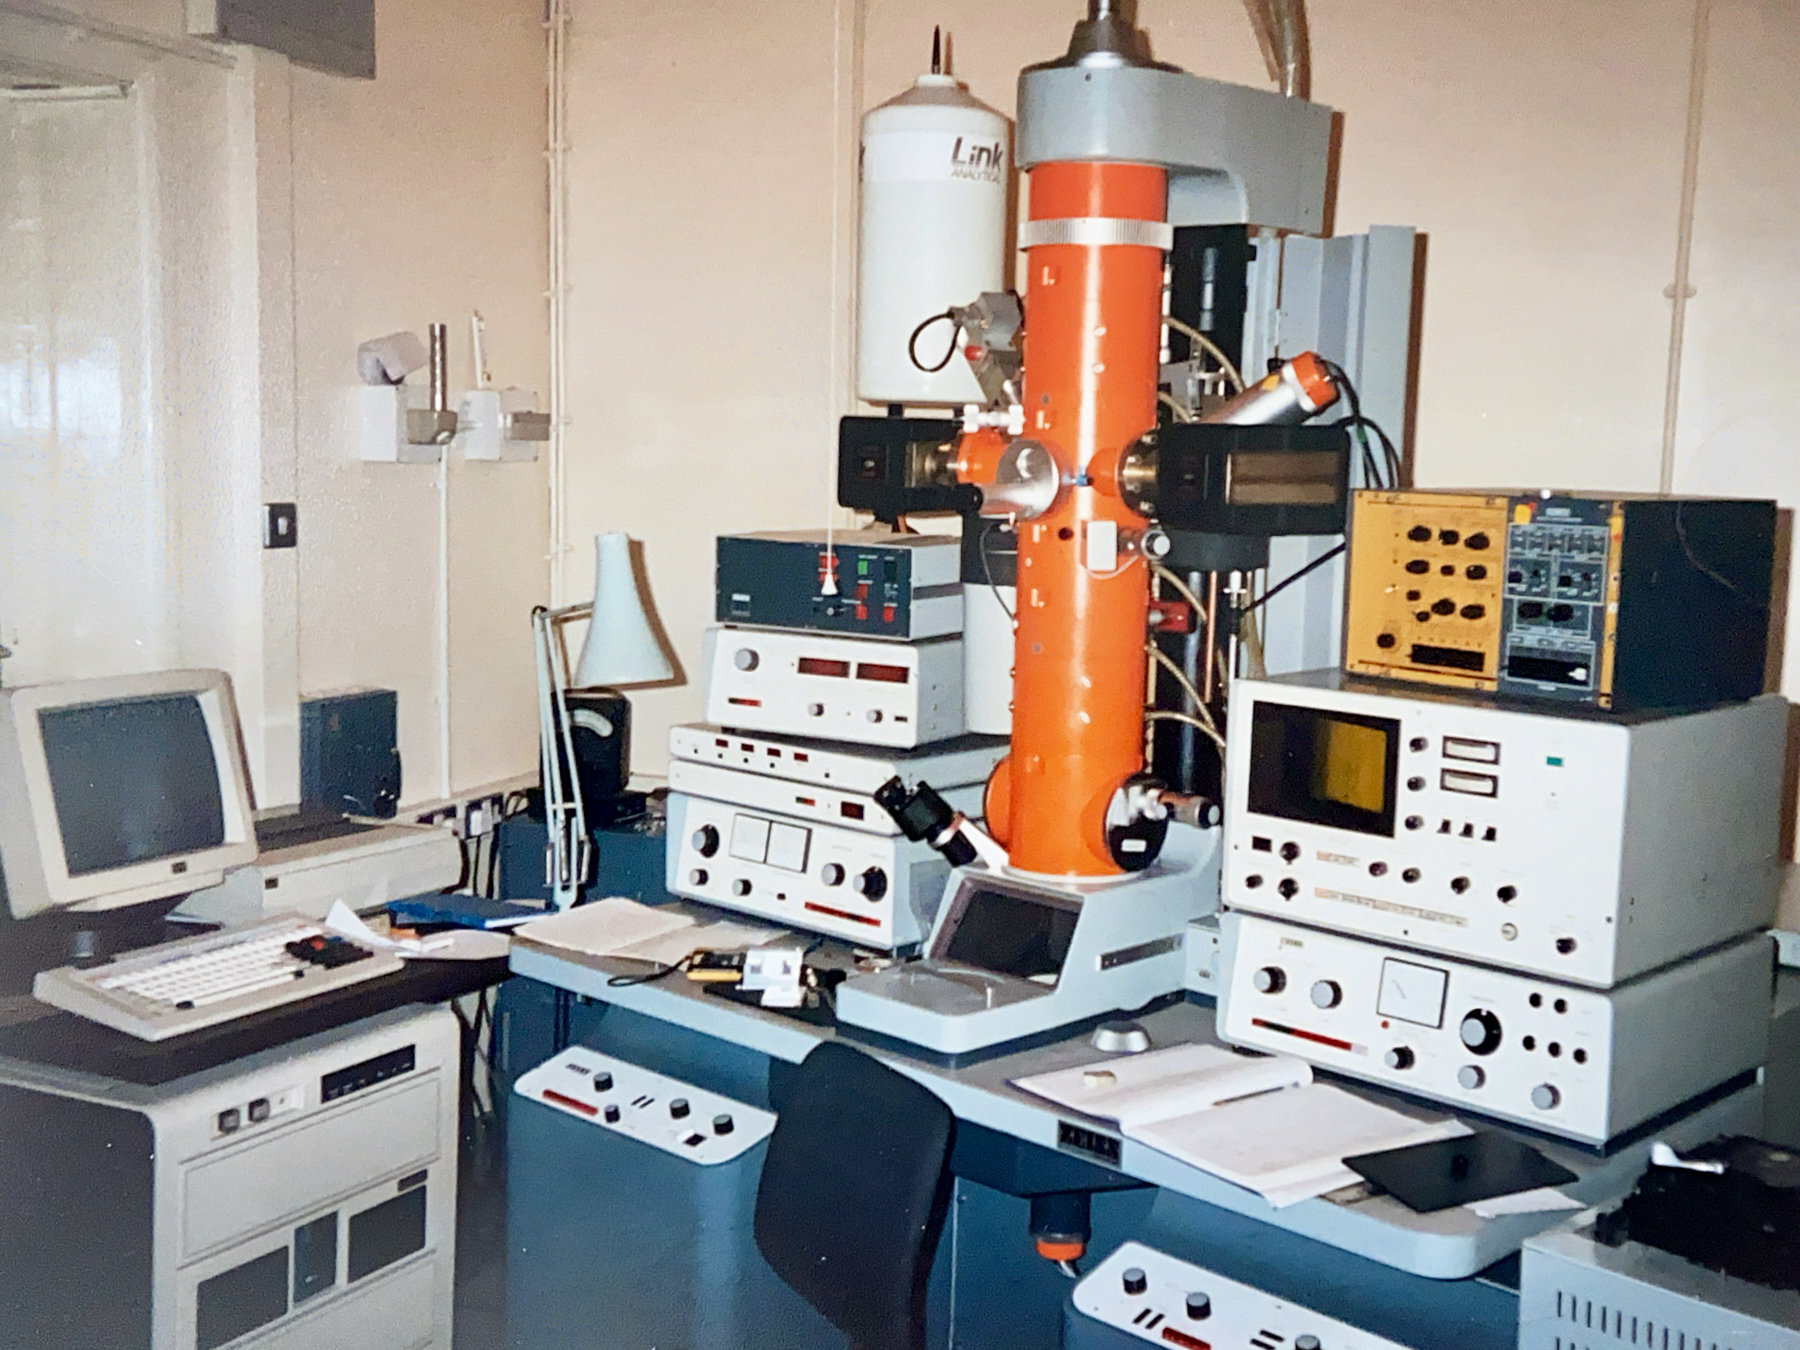 A laboratory setup with an old computer, various electronic measurement devices, and an electron microscope.